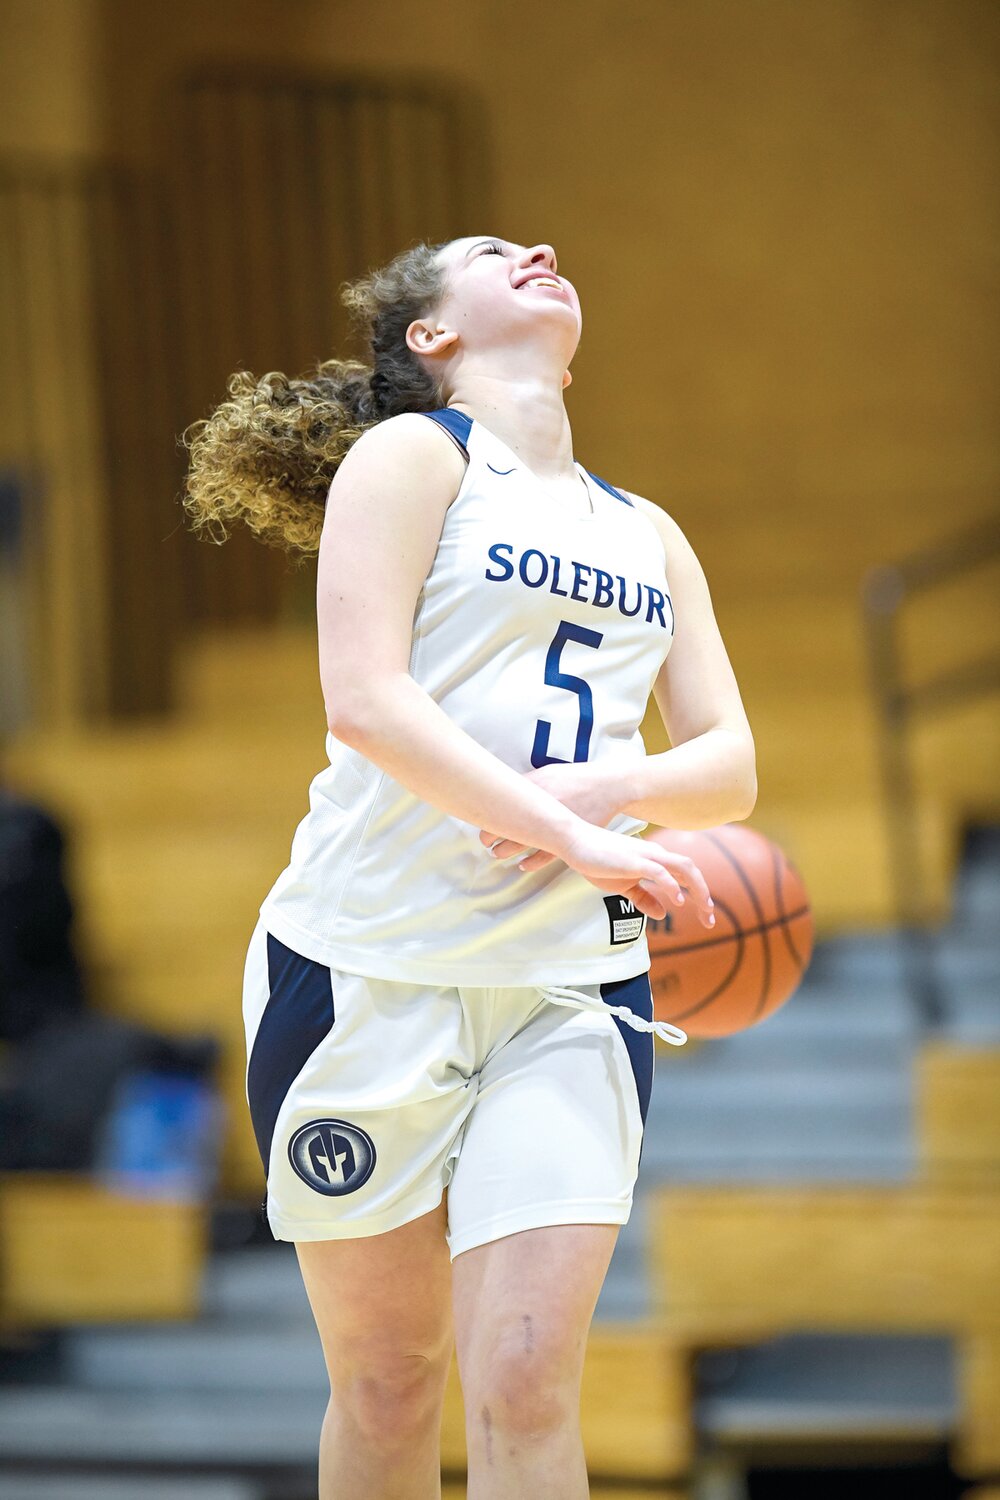 Solebury School’s Hanna Shmuckler can only laugh as a foul is called on her breakaway layup.